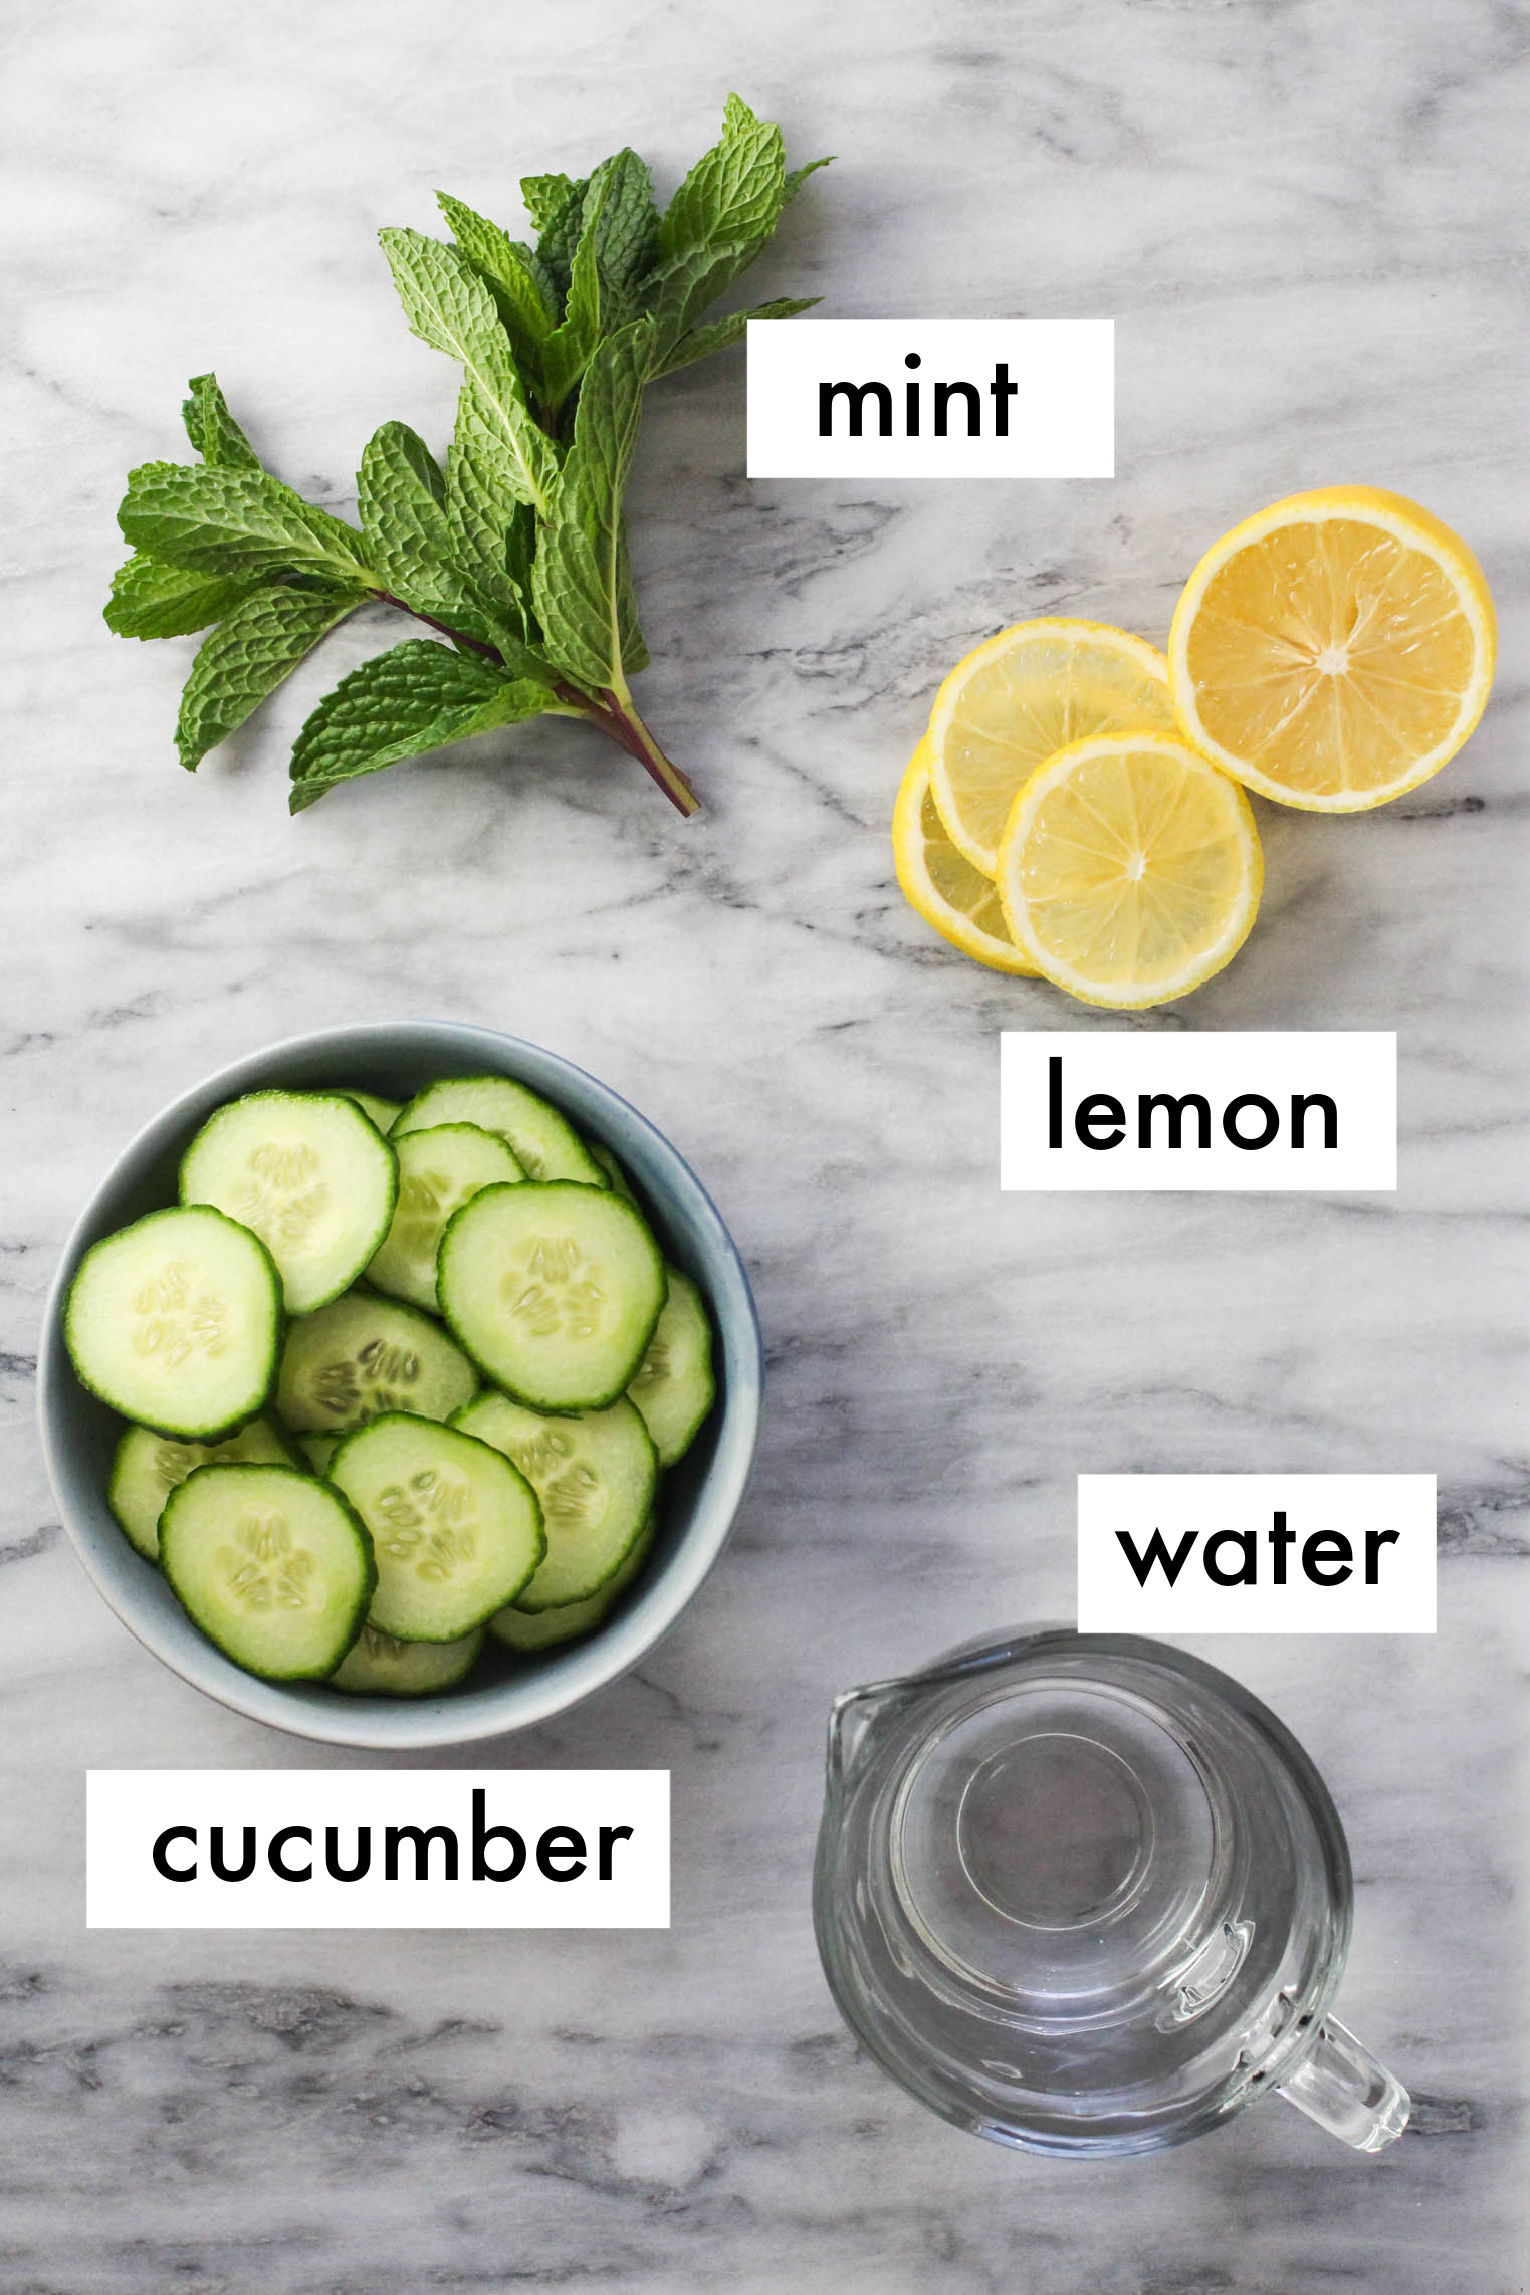 Ingredients for cucumber lemon mint infused water on marble background. The ingredients are labeled as follows: mint, lemon, cucumber, water.